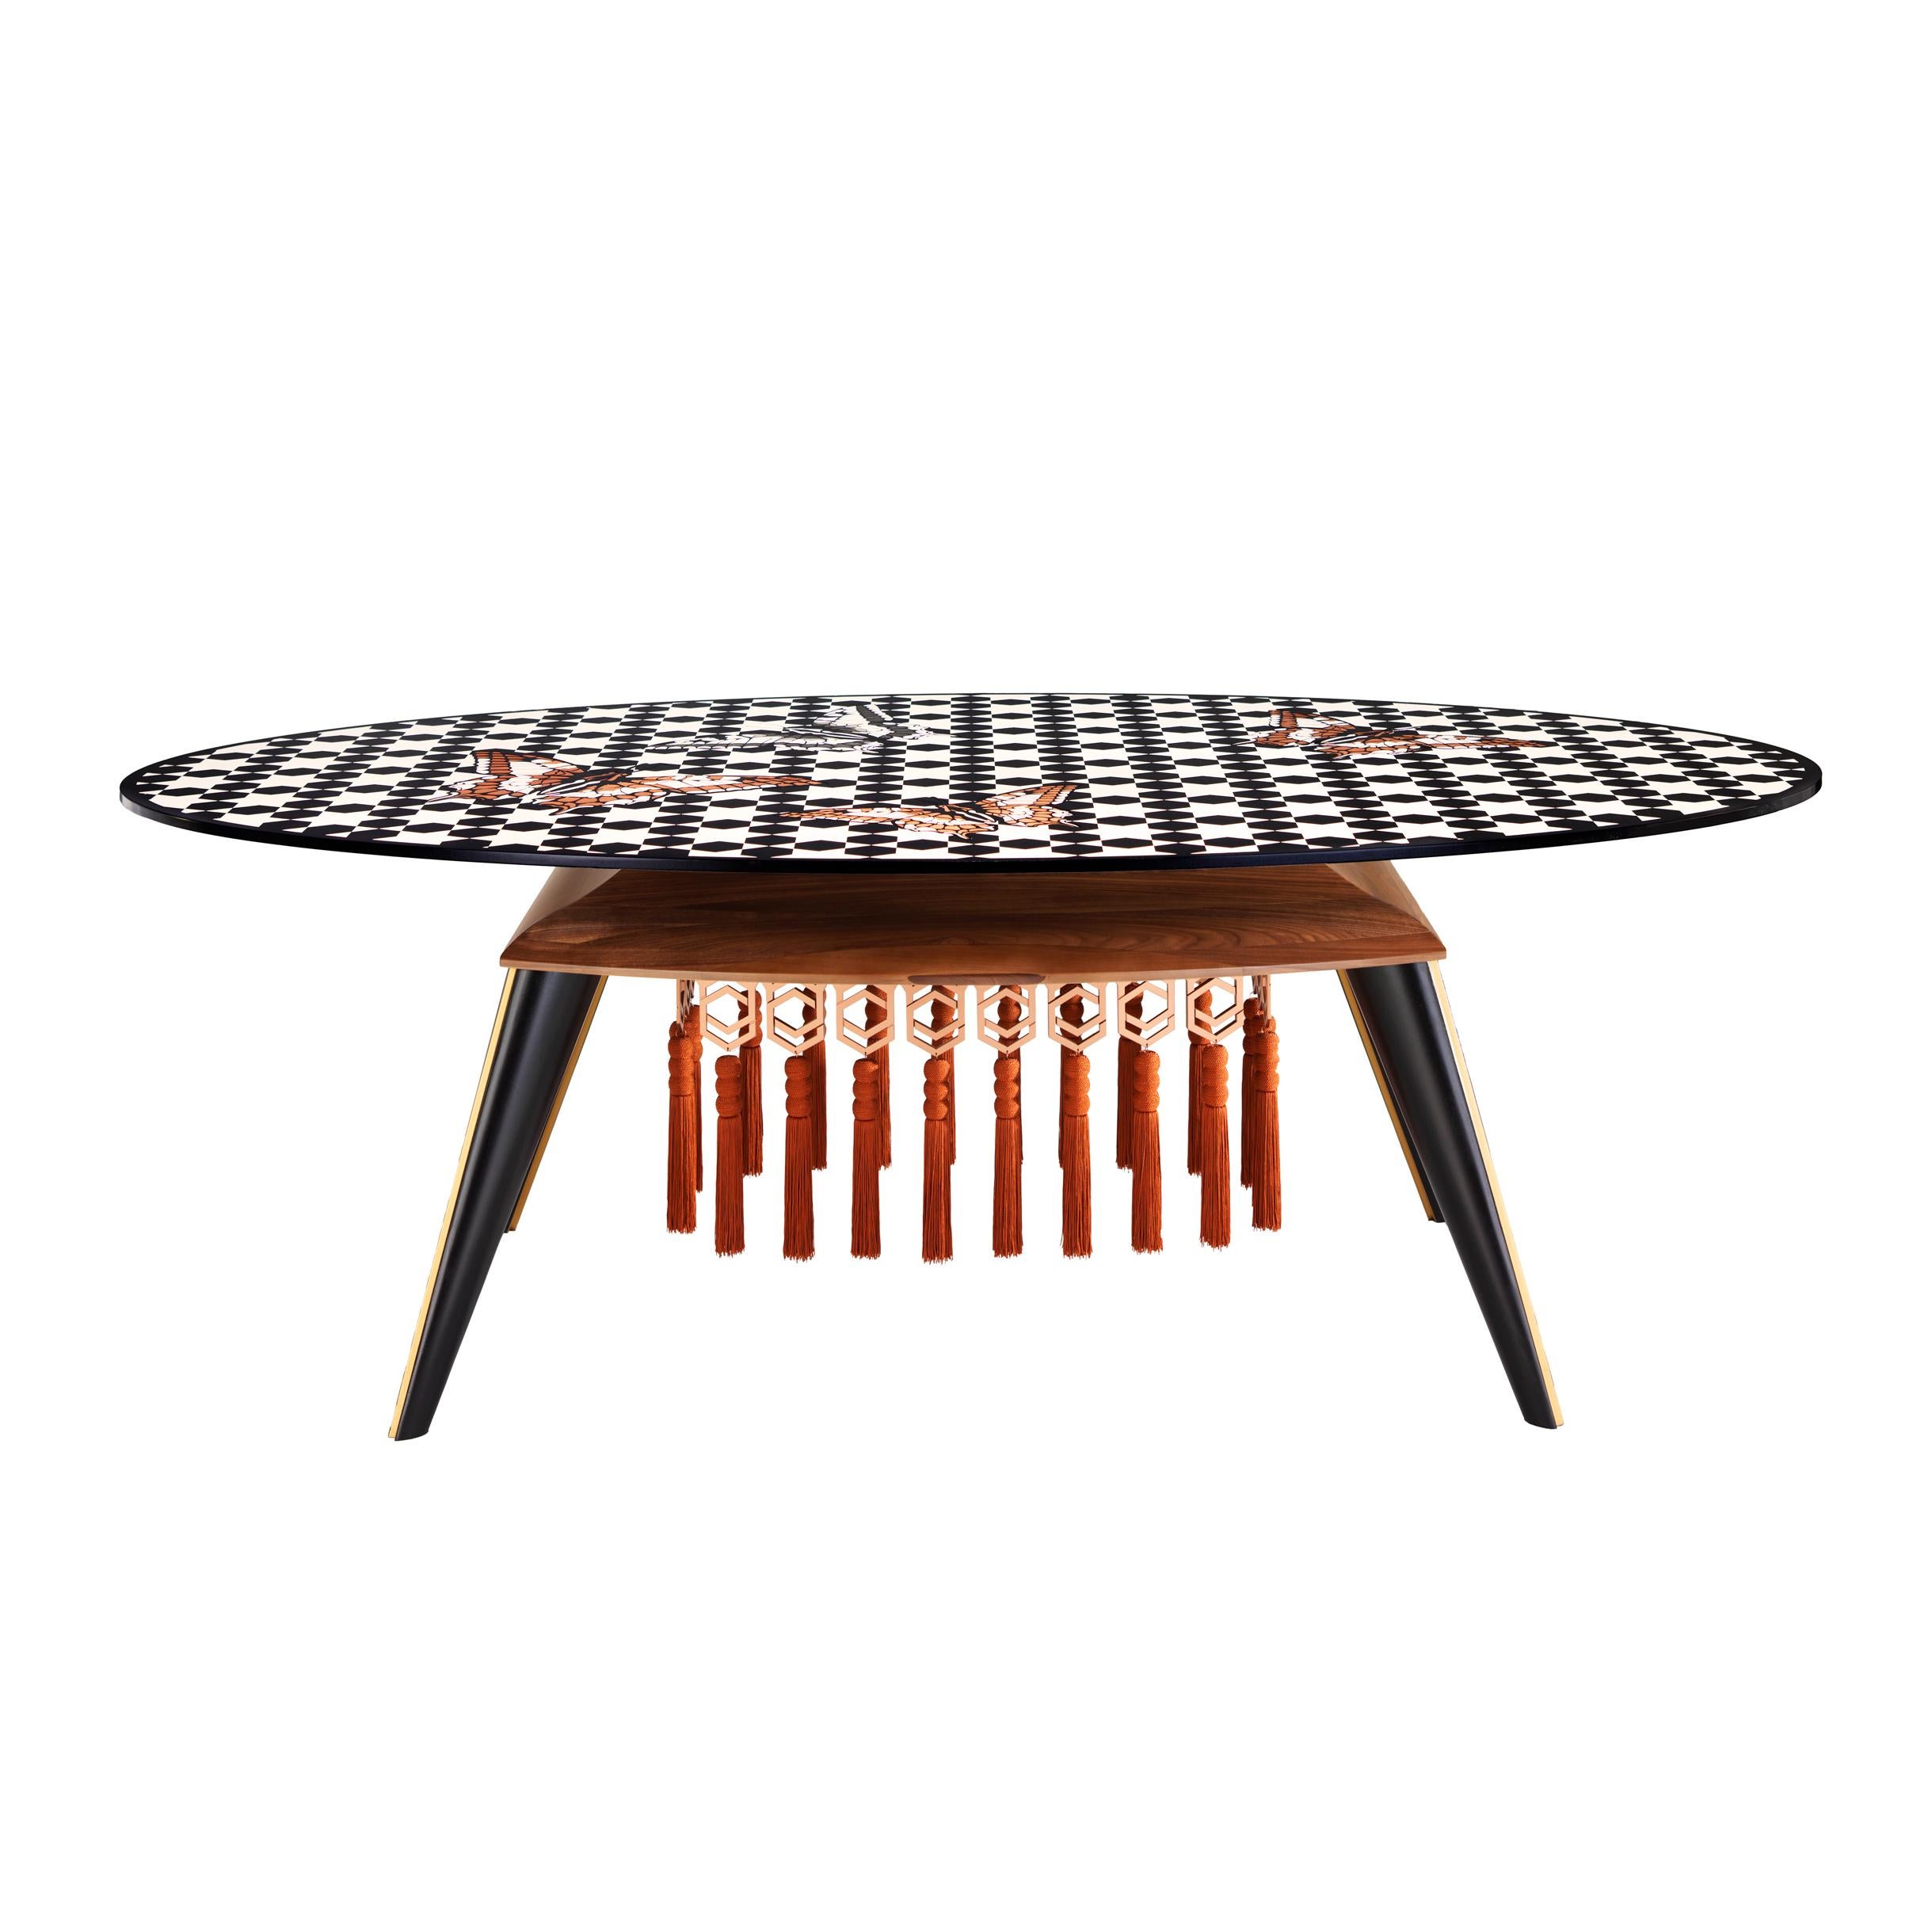 Contemporary White and Black Wood Veneer Oval Table with Copper Decorations  For Sale